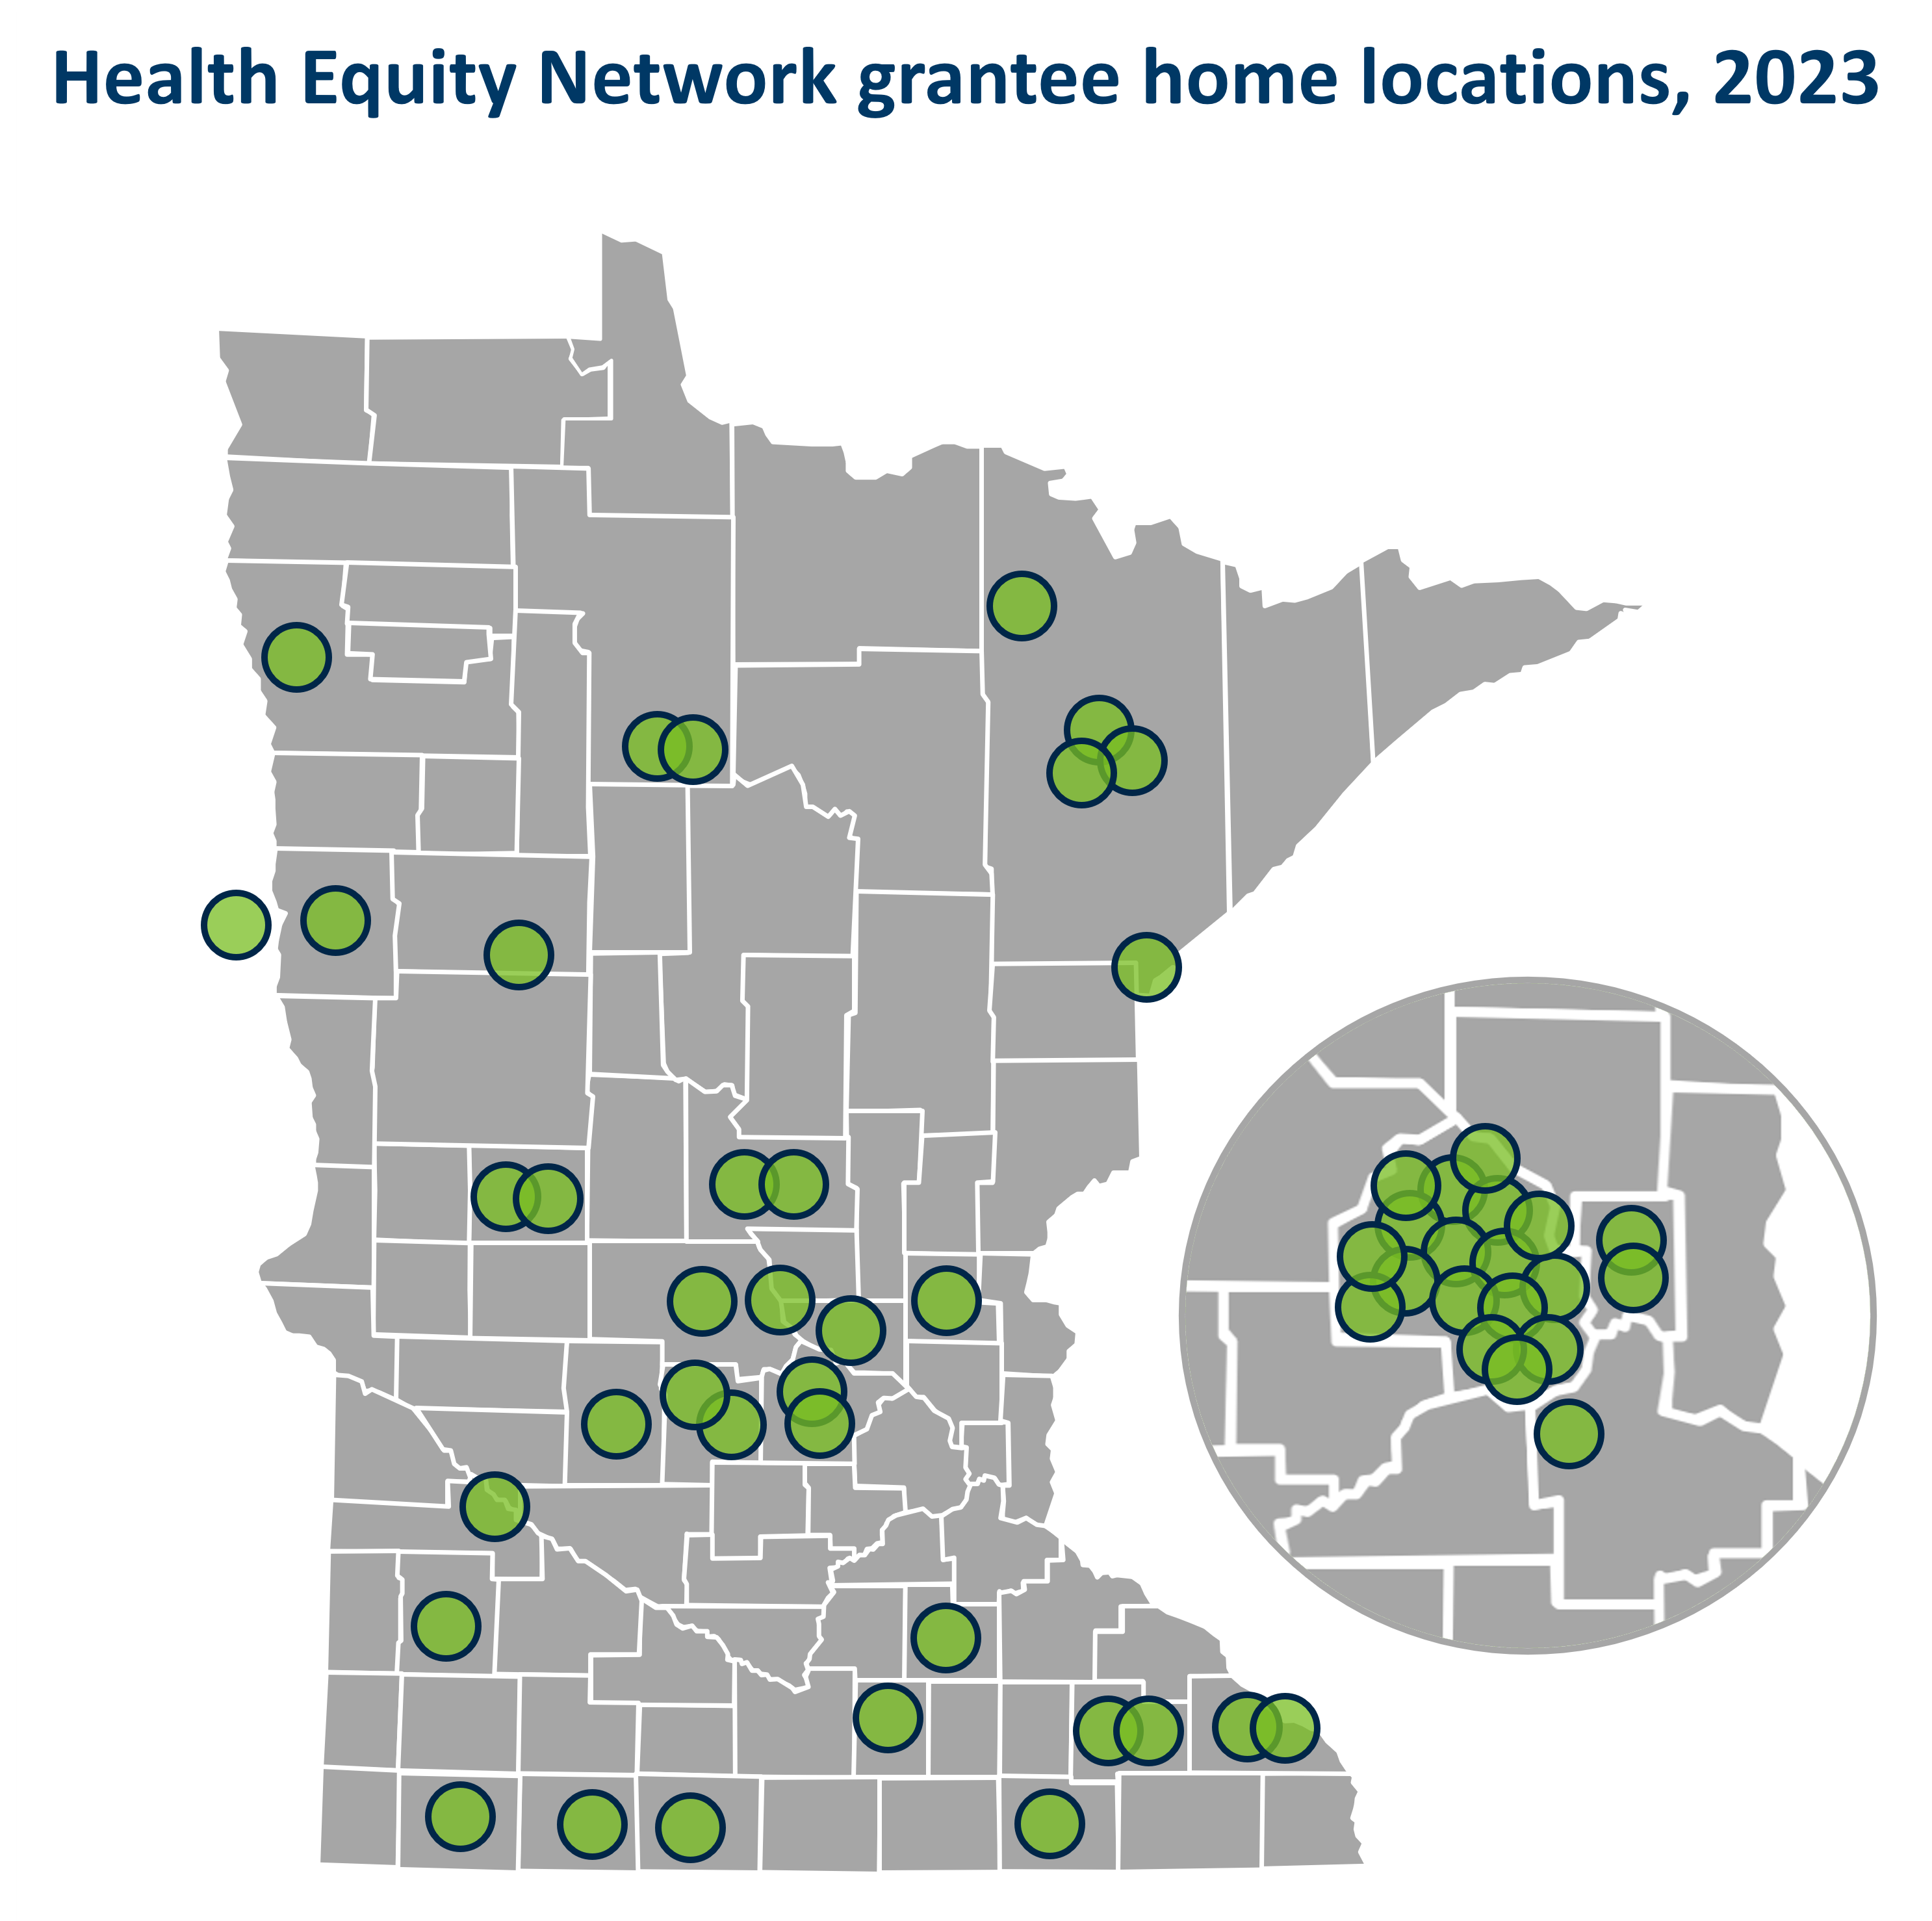 Map of Health Equity Network grantee locations